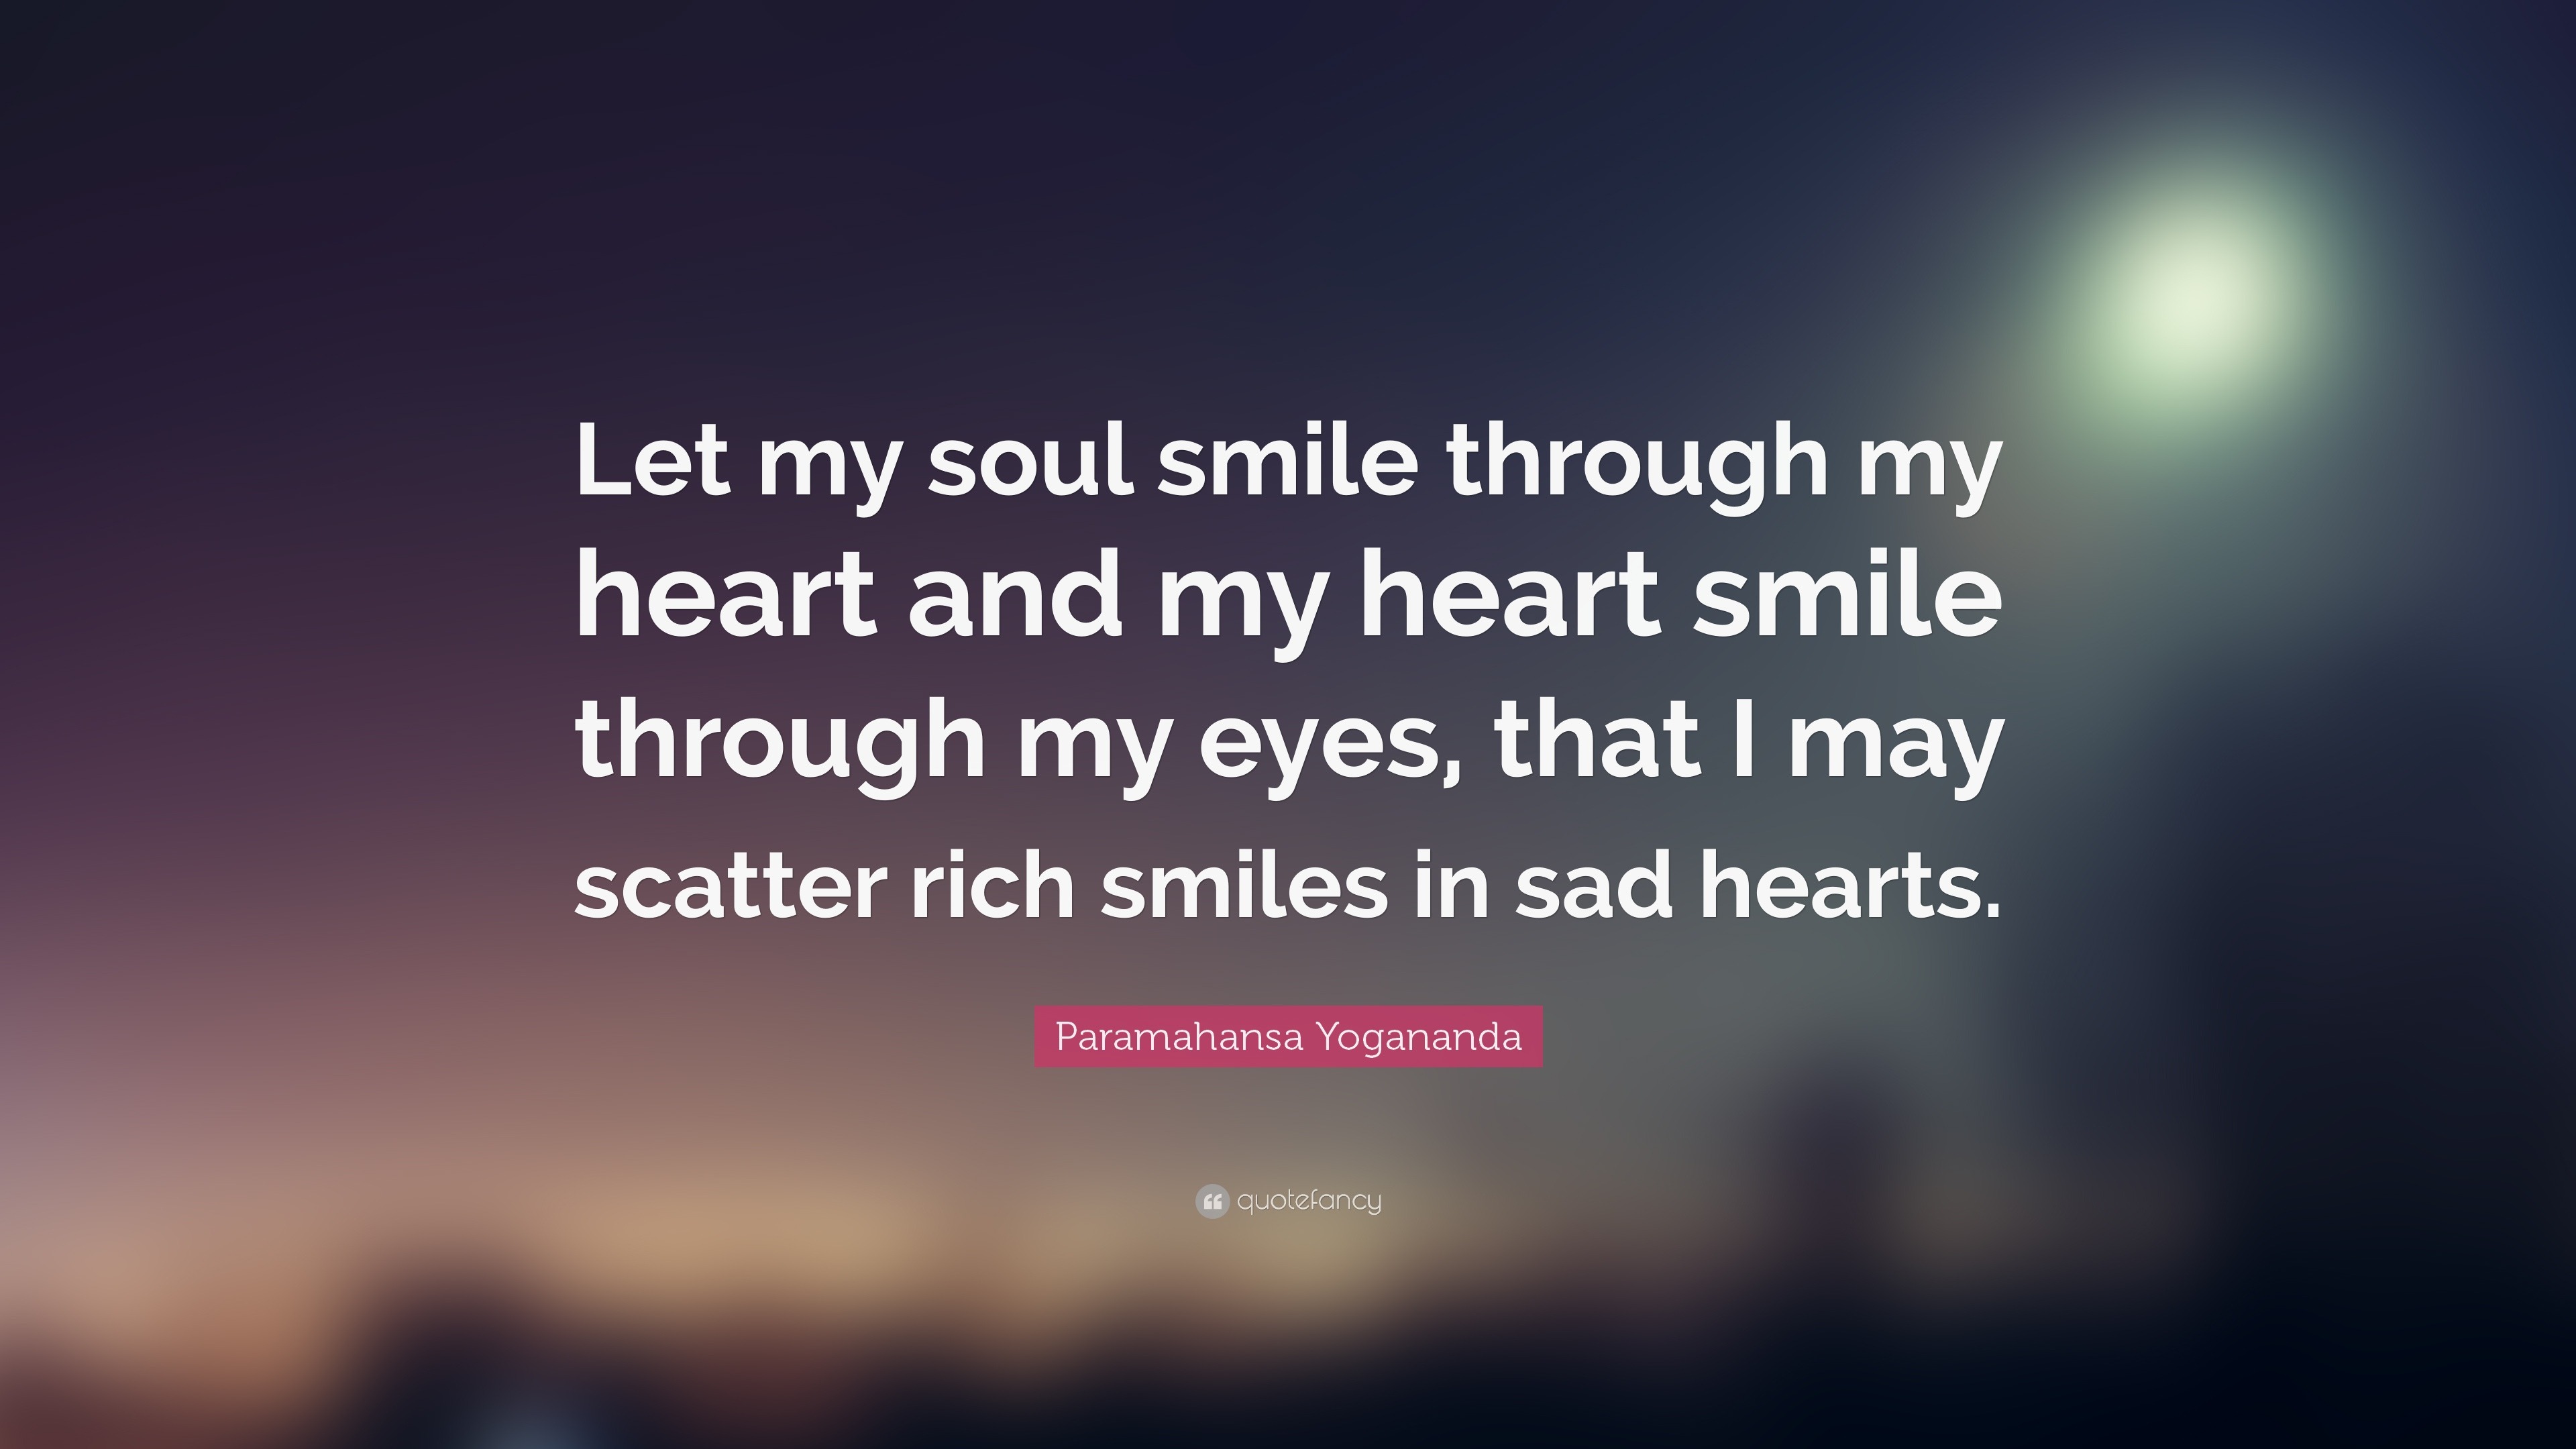 38866 Paramahansa Yogananda Quote Let my soul smile through my heart and